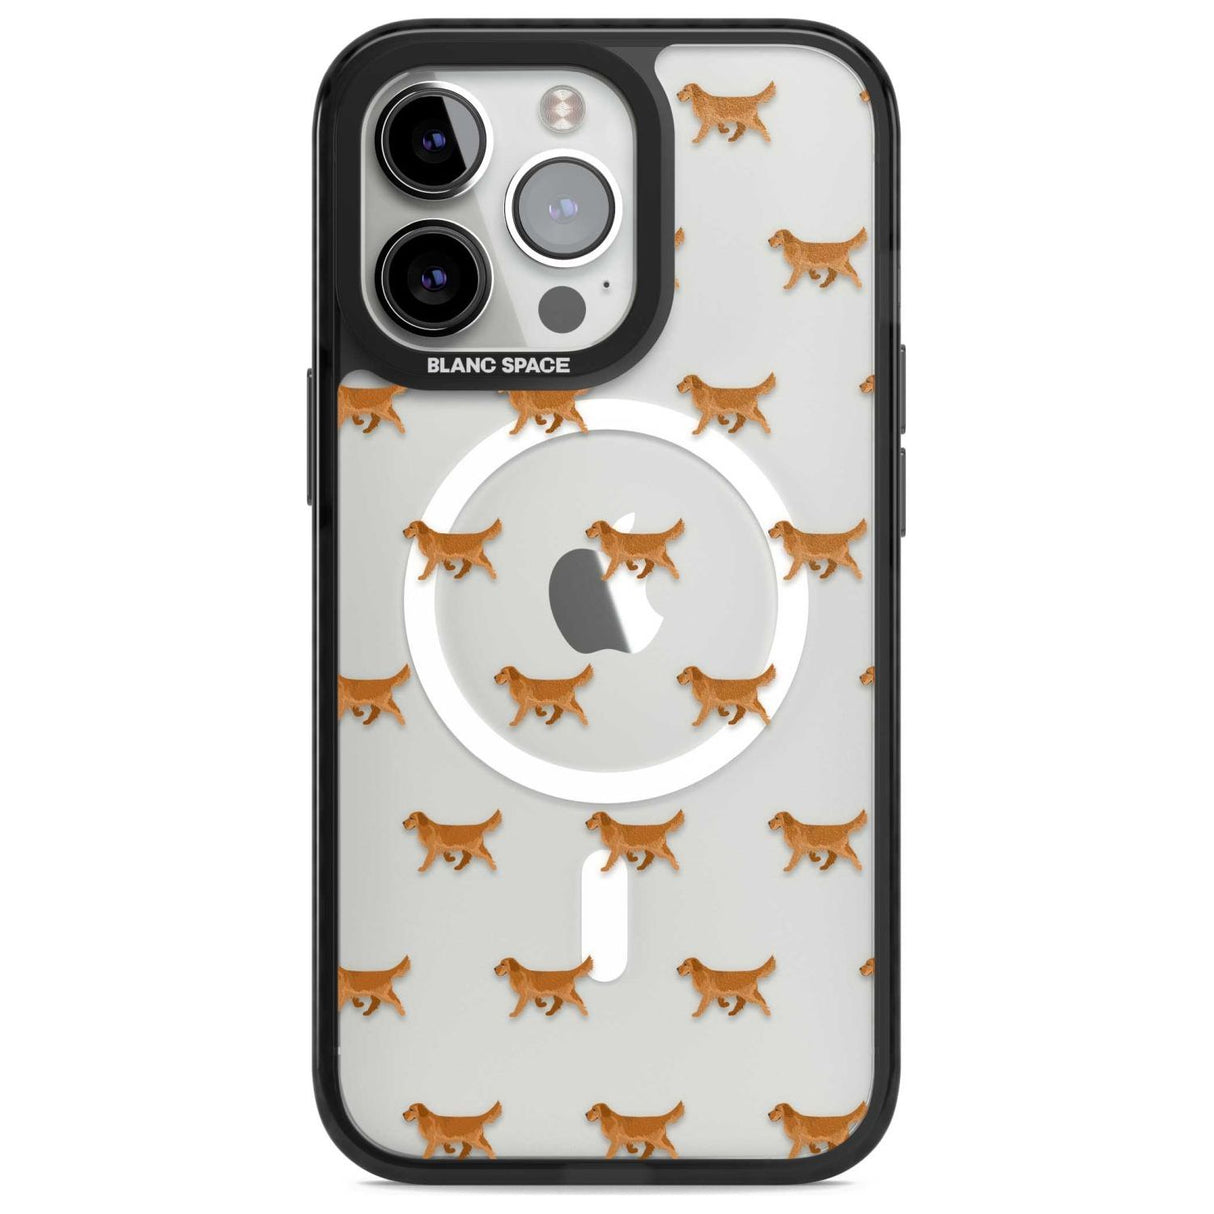 Golden Retriever Dog Pattern Clear Phone Case iPhone 15 Pro / Magsafe Black Impact Case,iPhone 15 Pro Max / Magsafe Black Impact Case,iPhone 14 Pro Max / Magsafe Black Impact Case,iPhone 13 Pro / Magsafe Black Impact Case,iPhone 14 Pro / Magsafe Black Impact Case Blanc Space